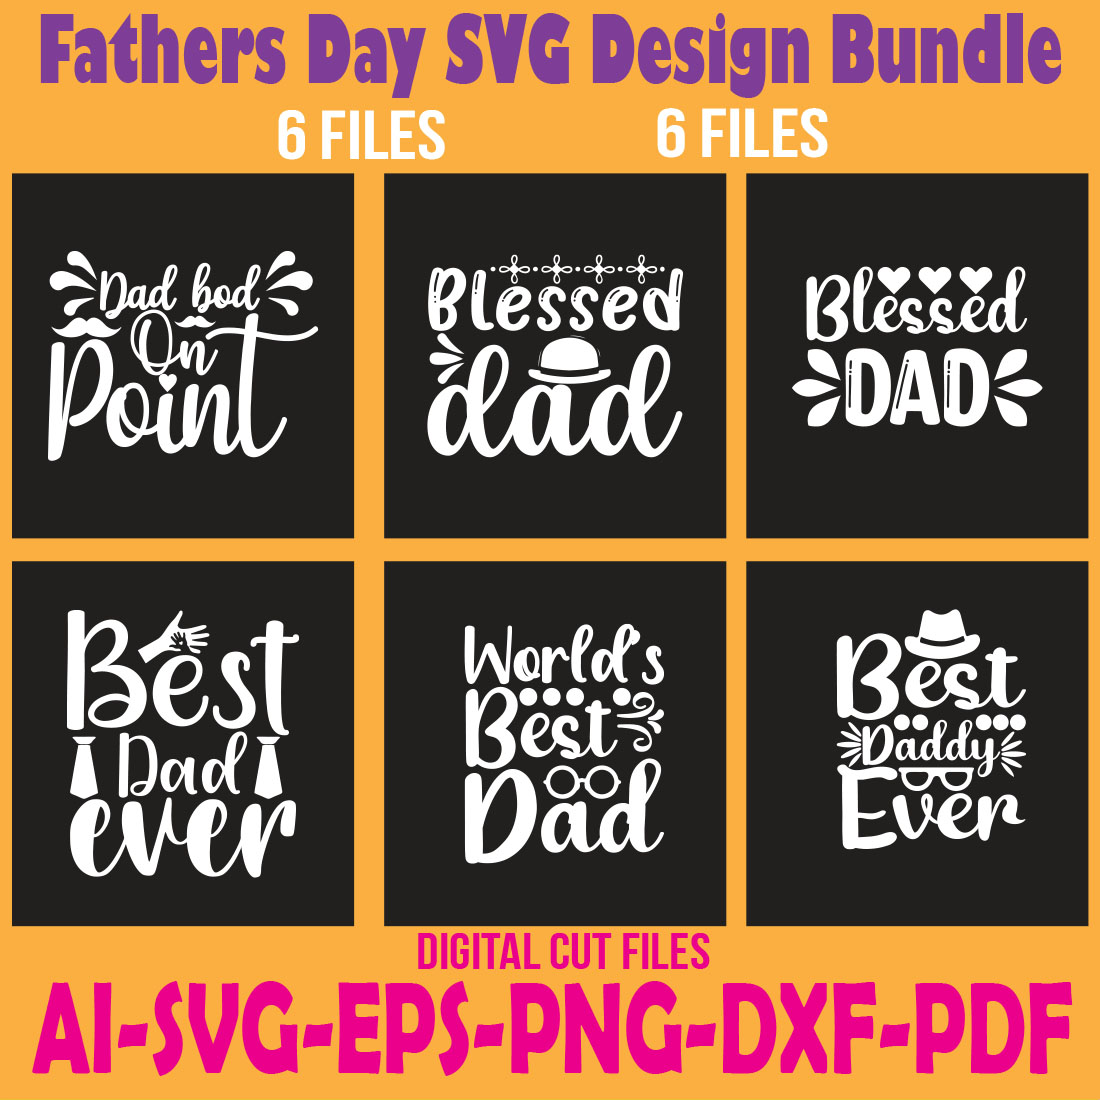 Fathers Day SVG Design Bundle cover image.